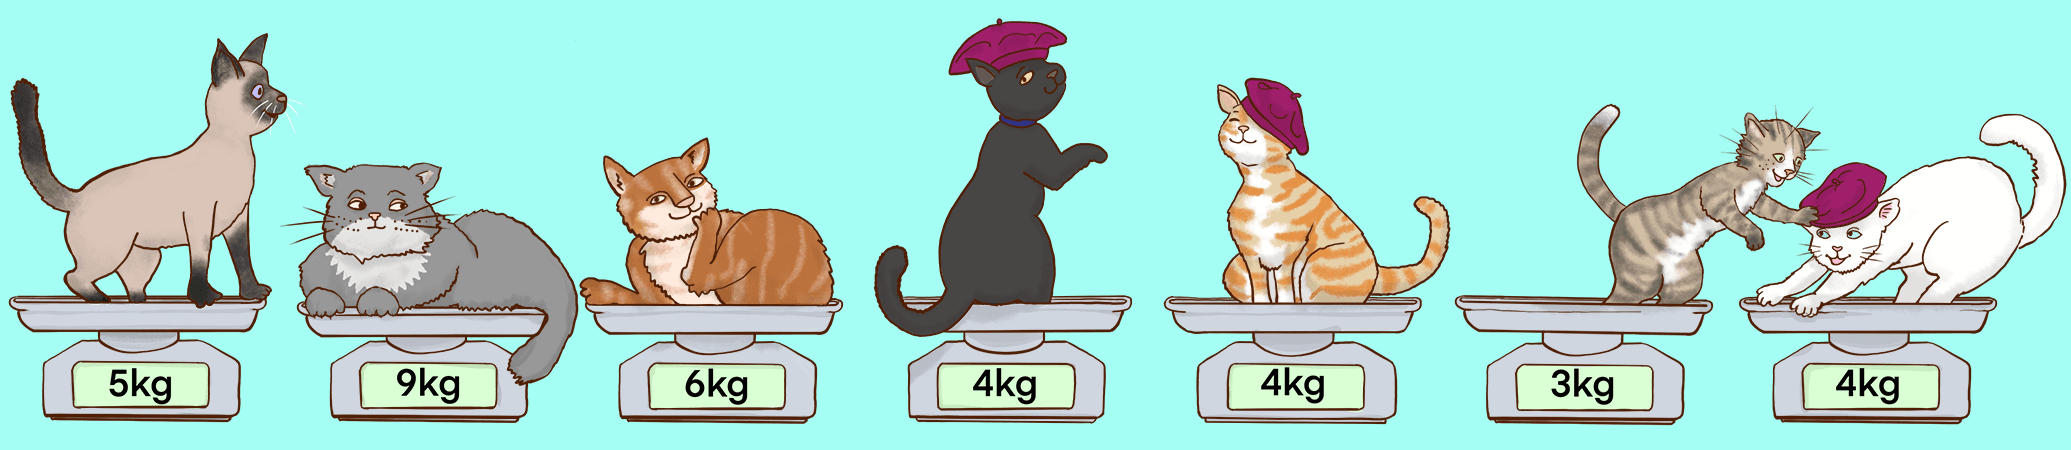 Seven different cats still sitting on cats with weights 
          5kg, 9kg, 6kg, 4kg, 4kg, 3kg, 4kg. The 4kg cats wear pink berets.